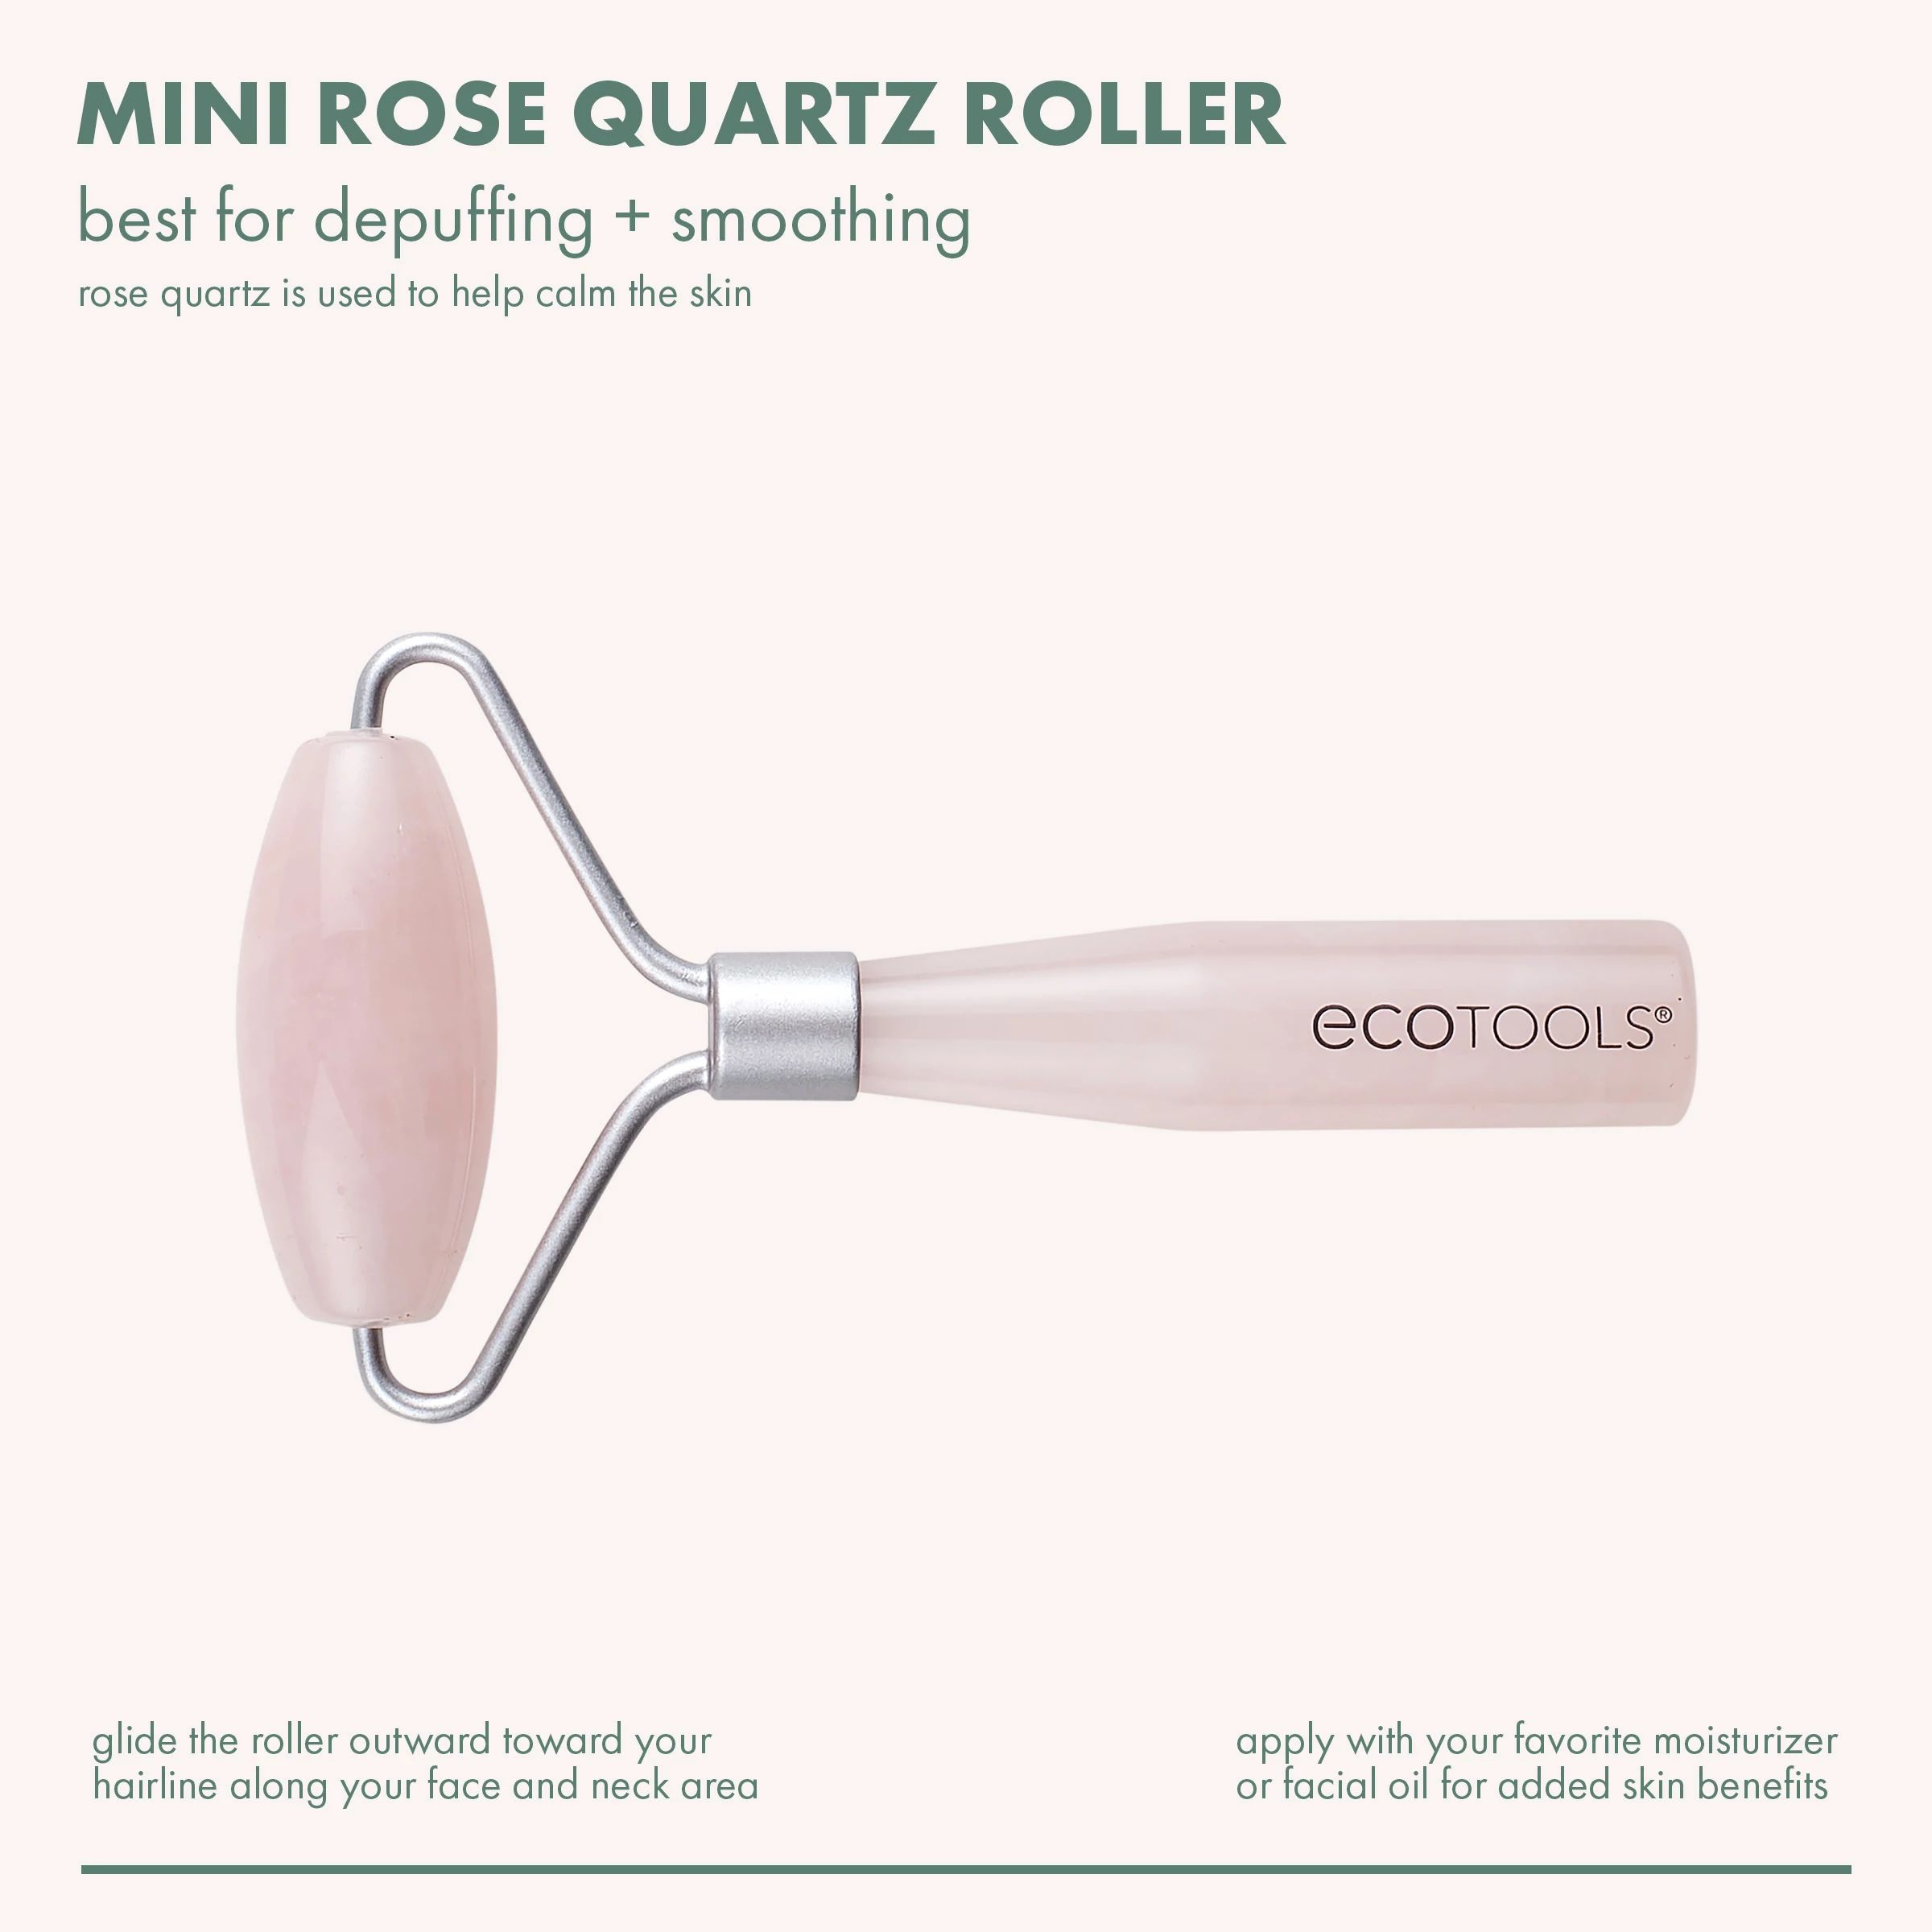 EcoTools Mini Rose Quartz Facial Roller and Massage Roller, Skincare and Sculpting Tool,1 Count - image 3 of 9